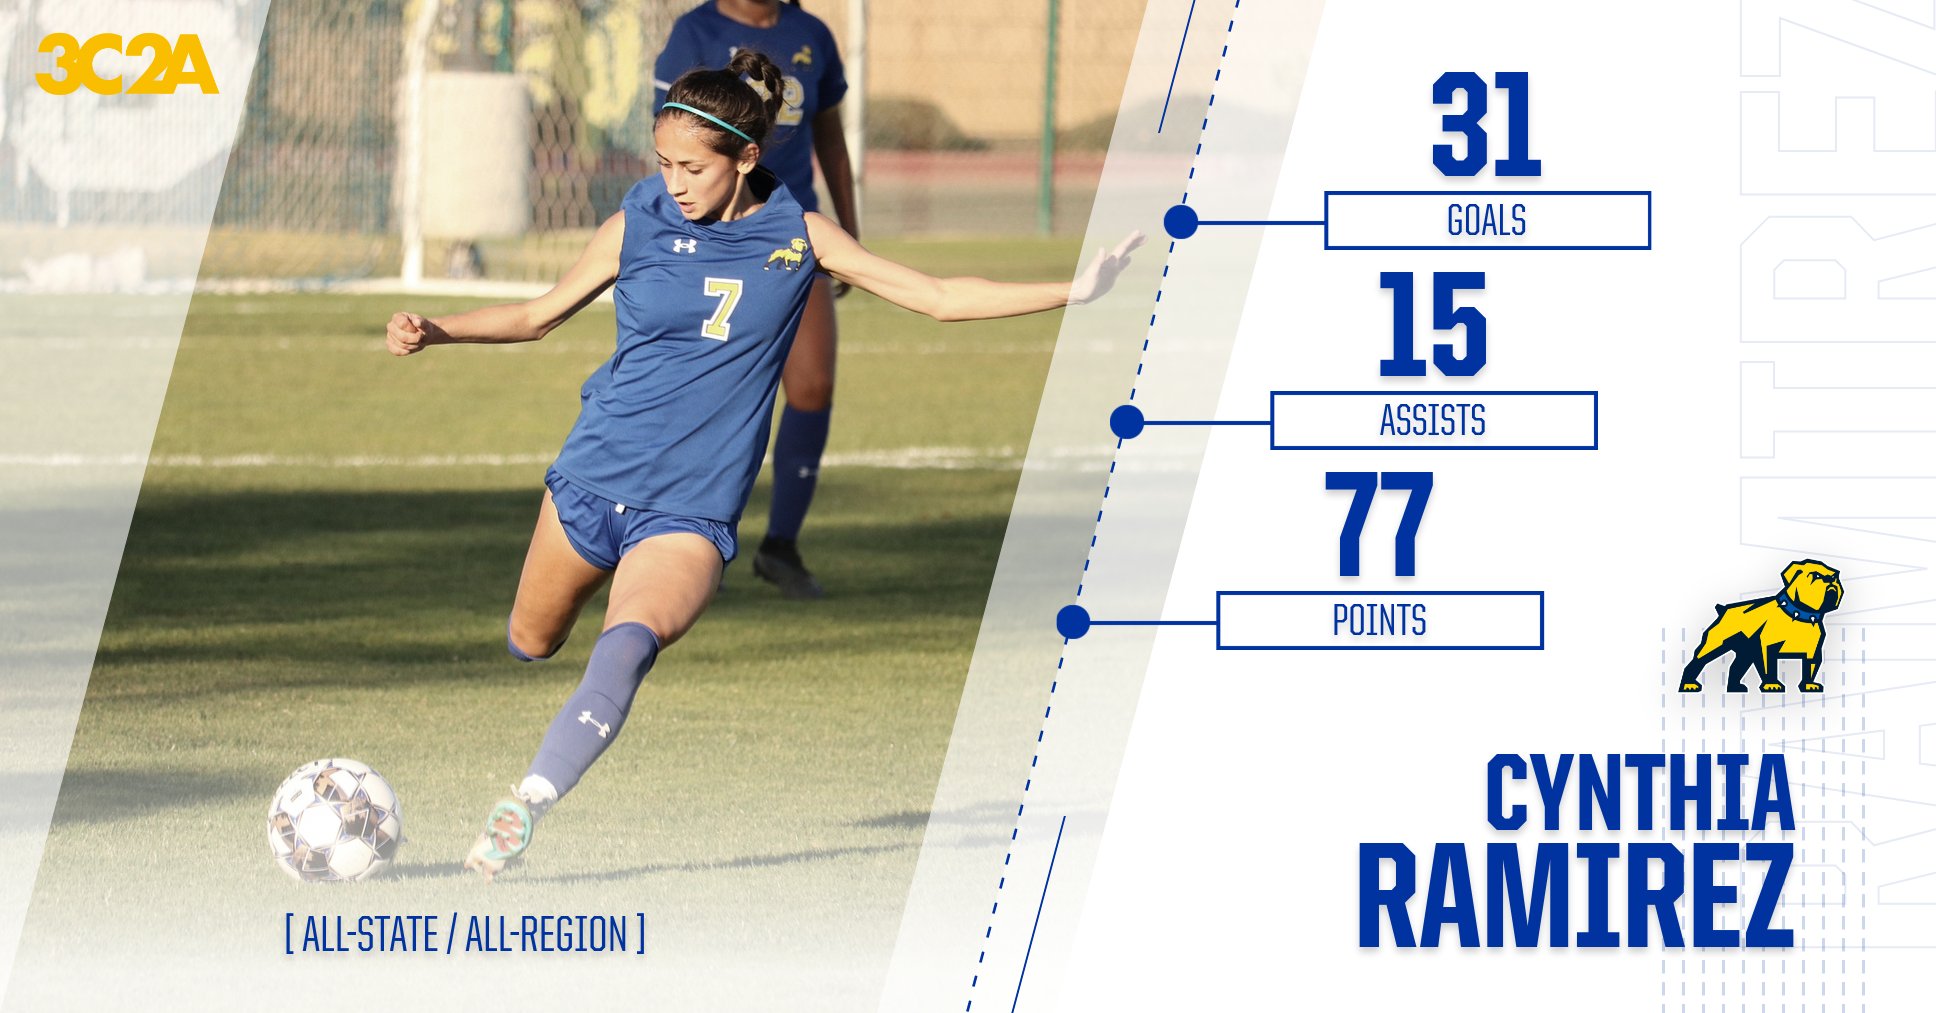 Women's Soccer: Cynthia Ramirez Named to 3C2A All-State and All-Region Teams